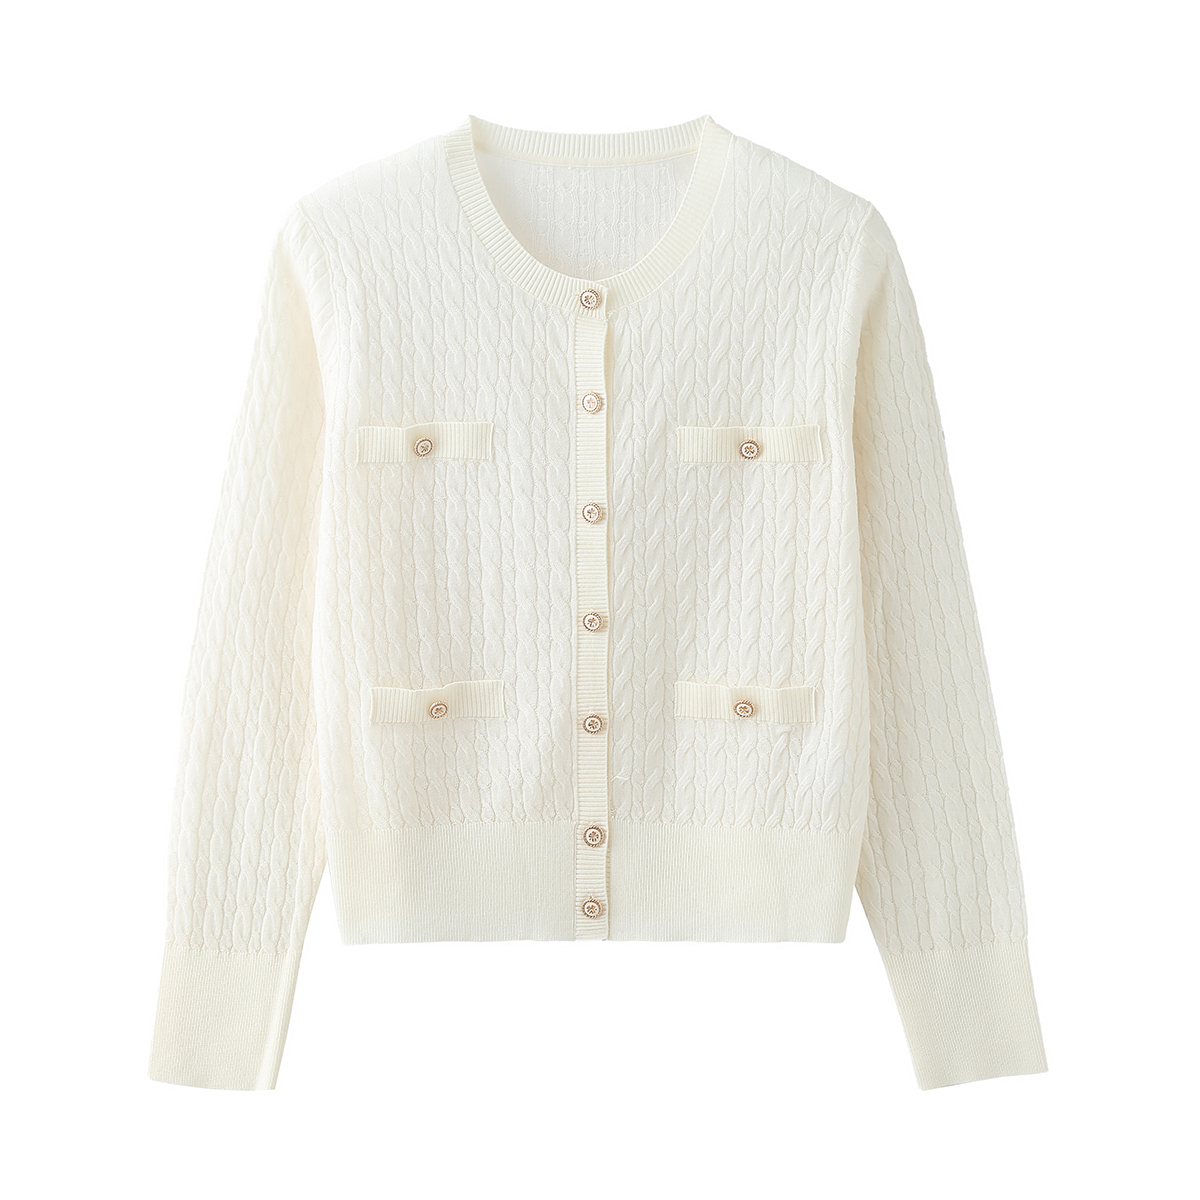 Round Neck Chanel-style Wool Sweater1